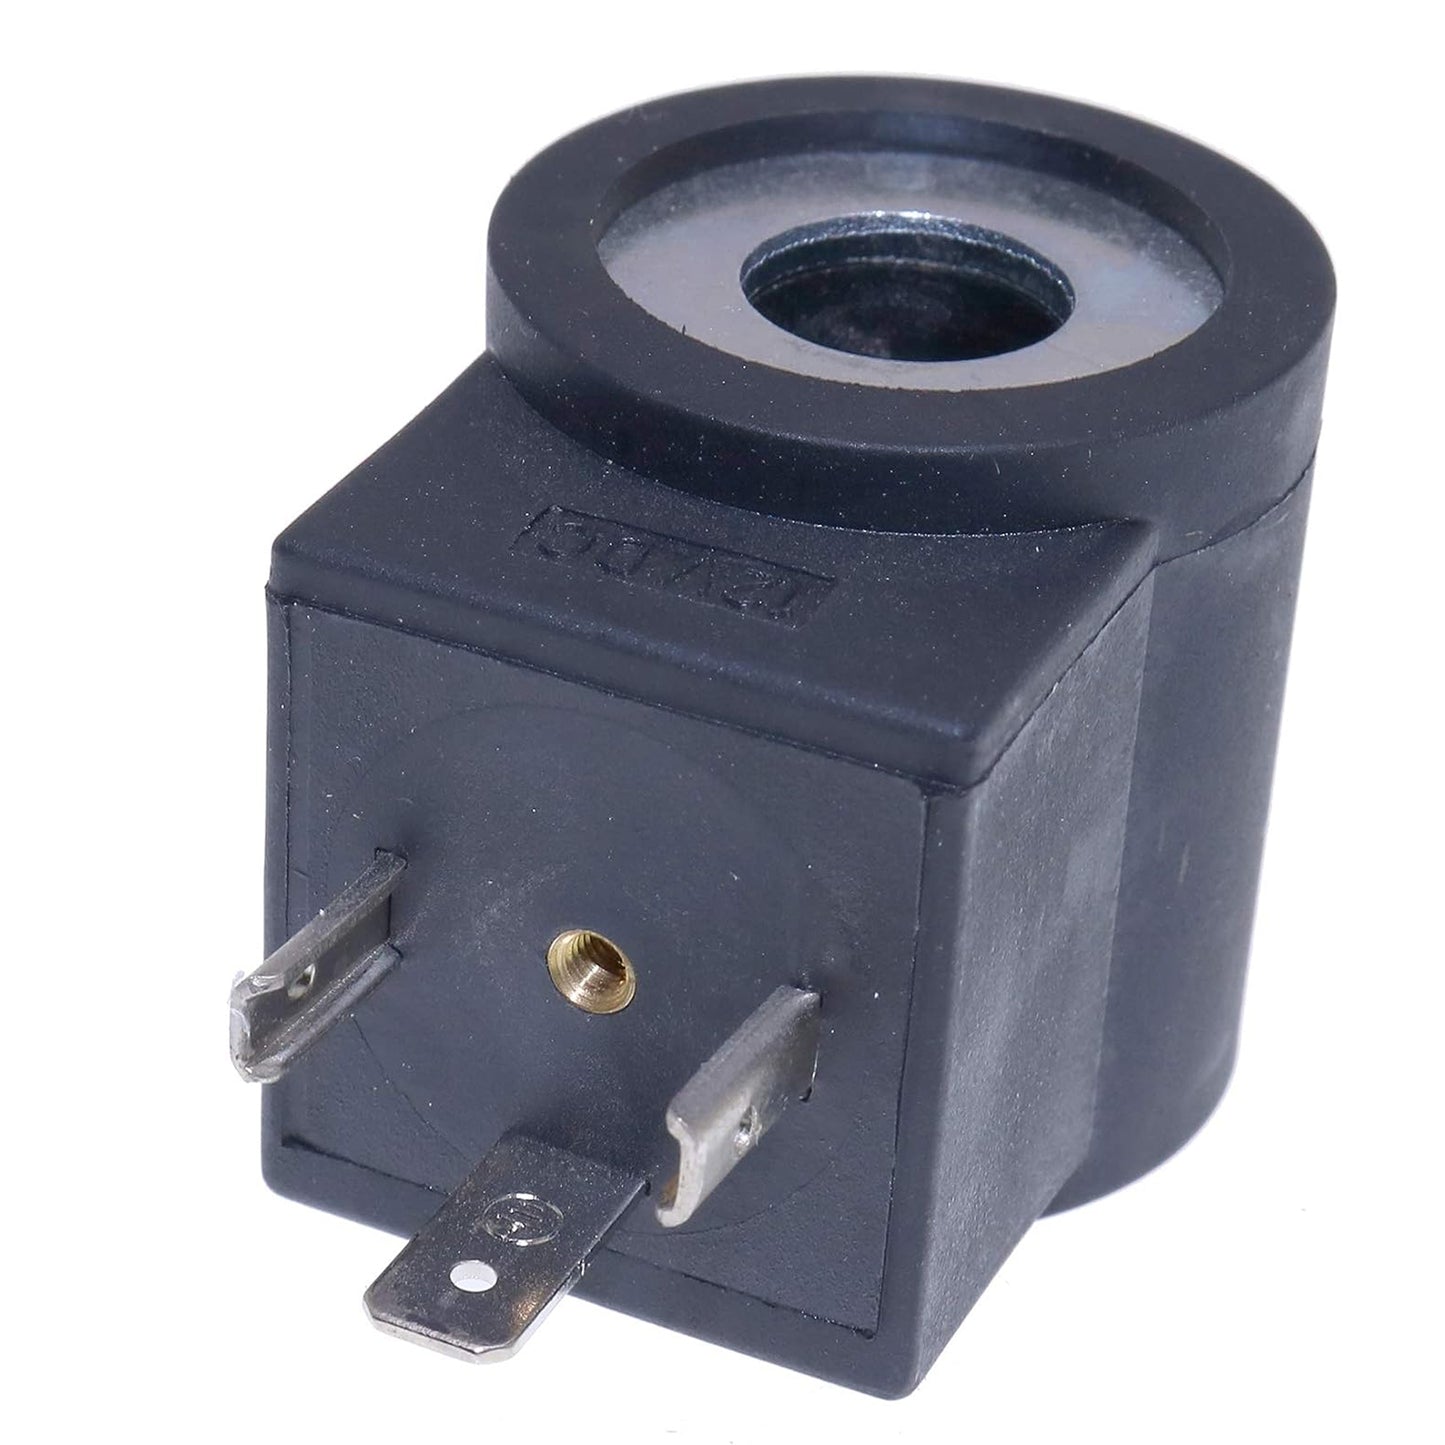 6306012 Solenoid Valve Coil Compatible with HydraForce Stem Series 08 80 88 98